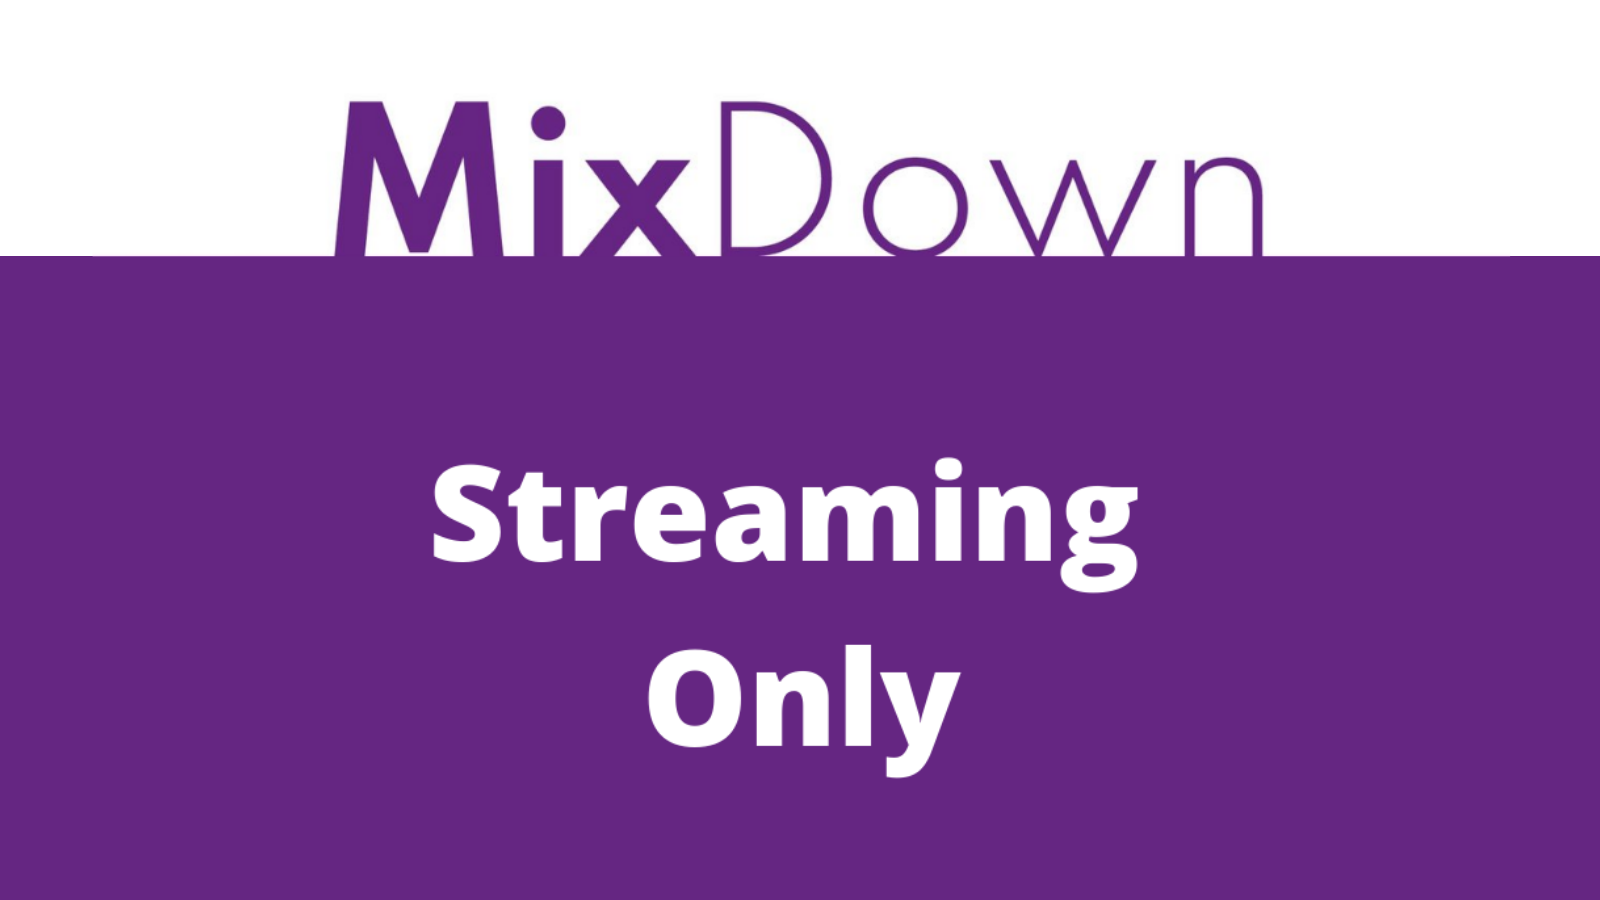 MixDown 2021 goes Streaming